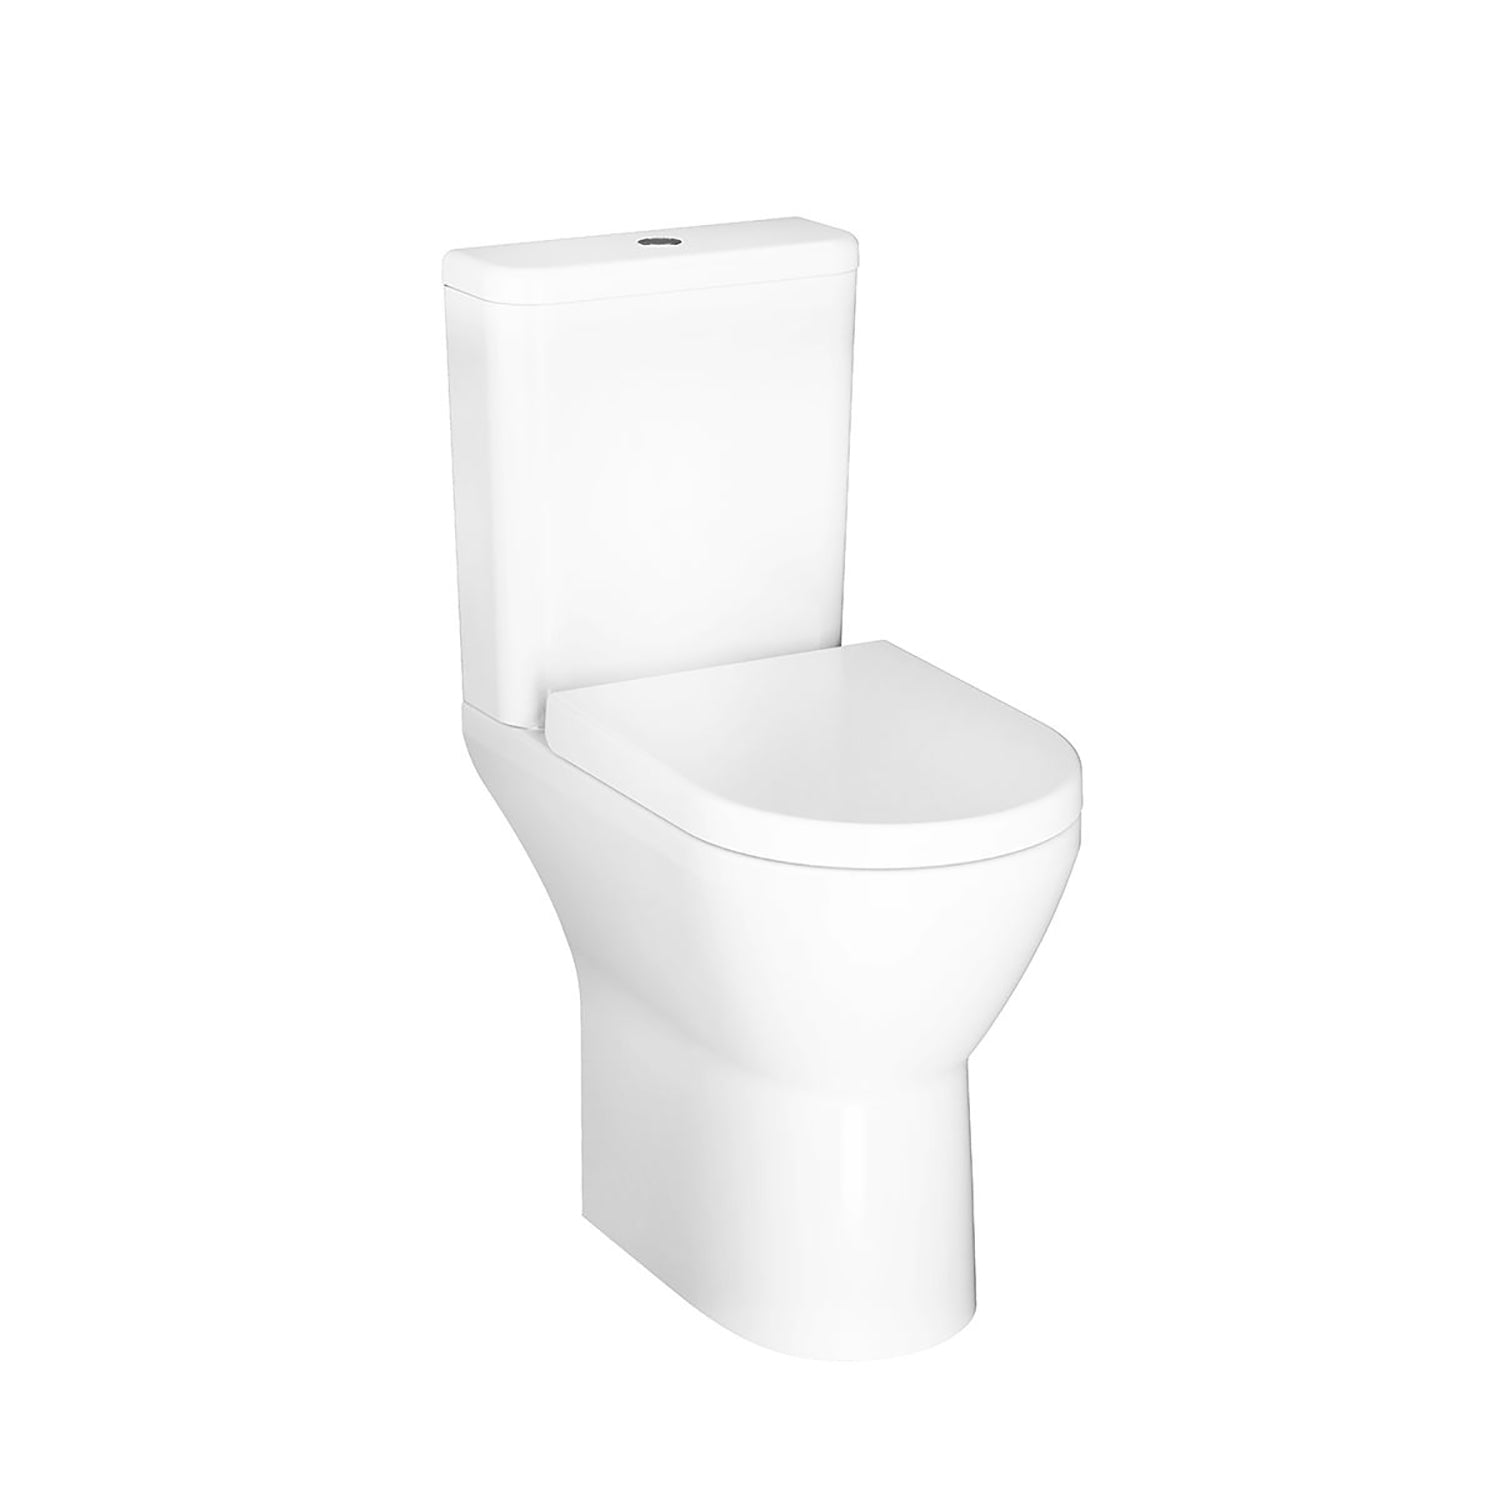 Vesta comfort height close coupled toilet in a white finish, 500mm with seat, cover and cistern not included, cistern included on a white background.